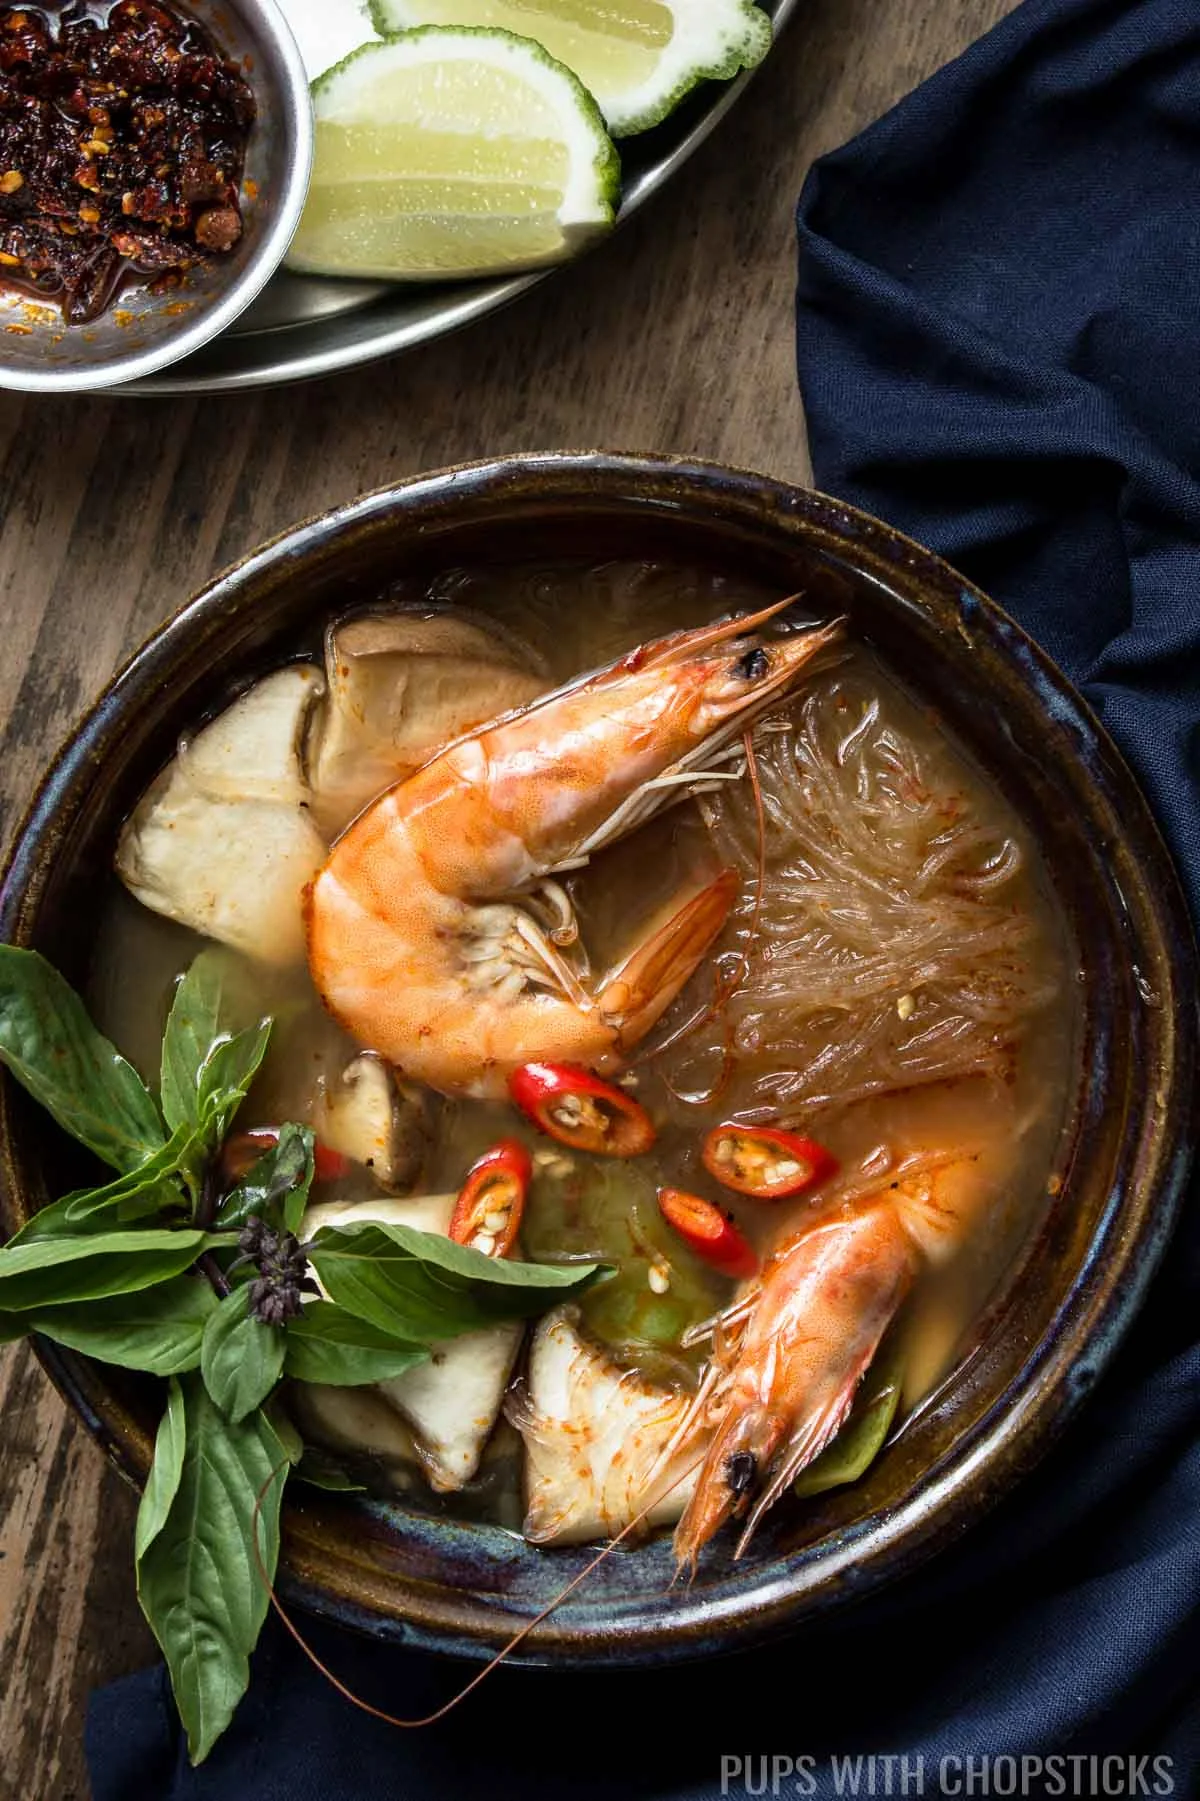 Tom Yum Goong (Thai Hot and Sour Soup with Shrimp)